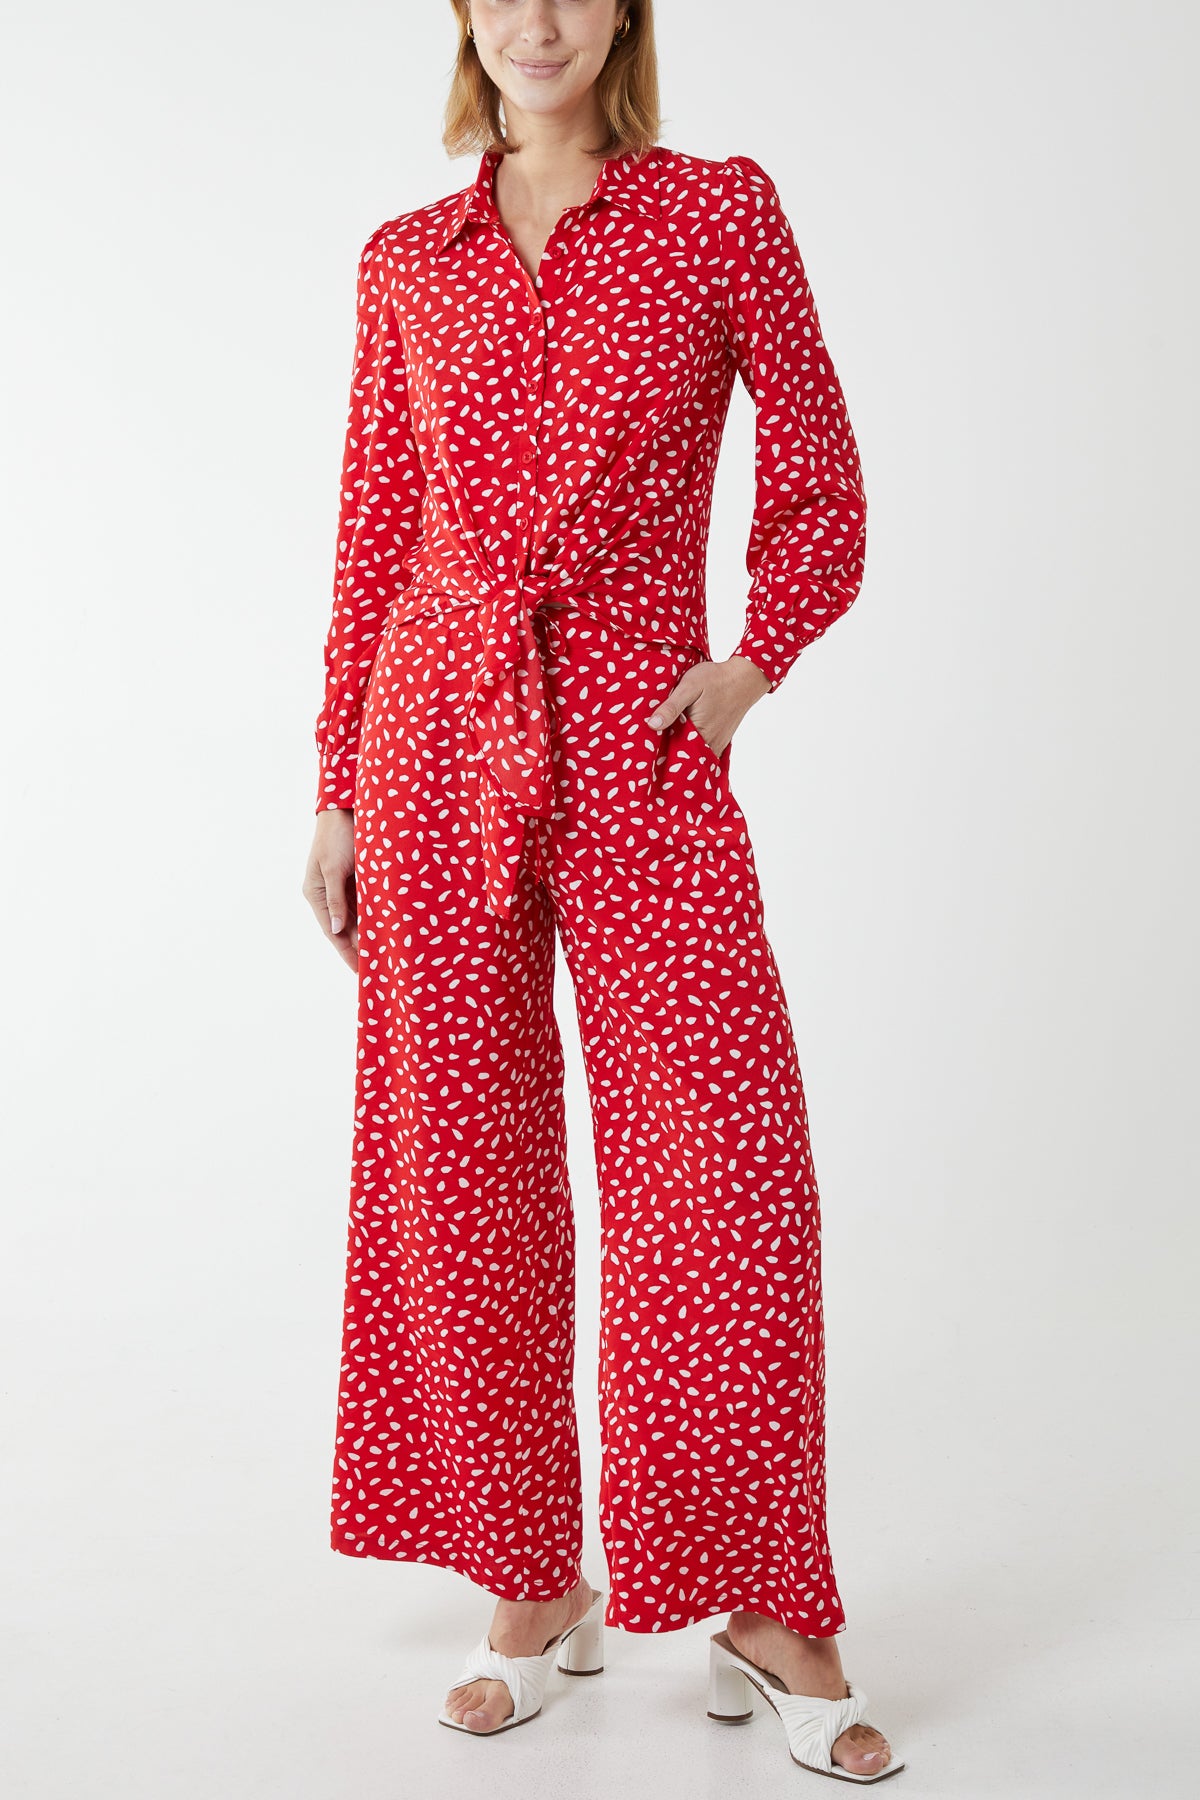 Polka Dot Tie Front Shirt and Trouser Co-Ord